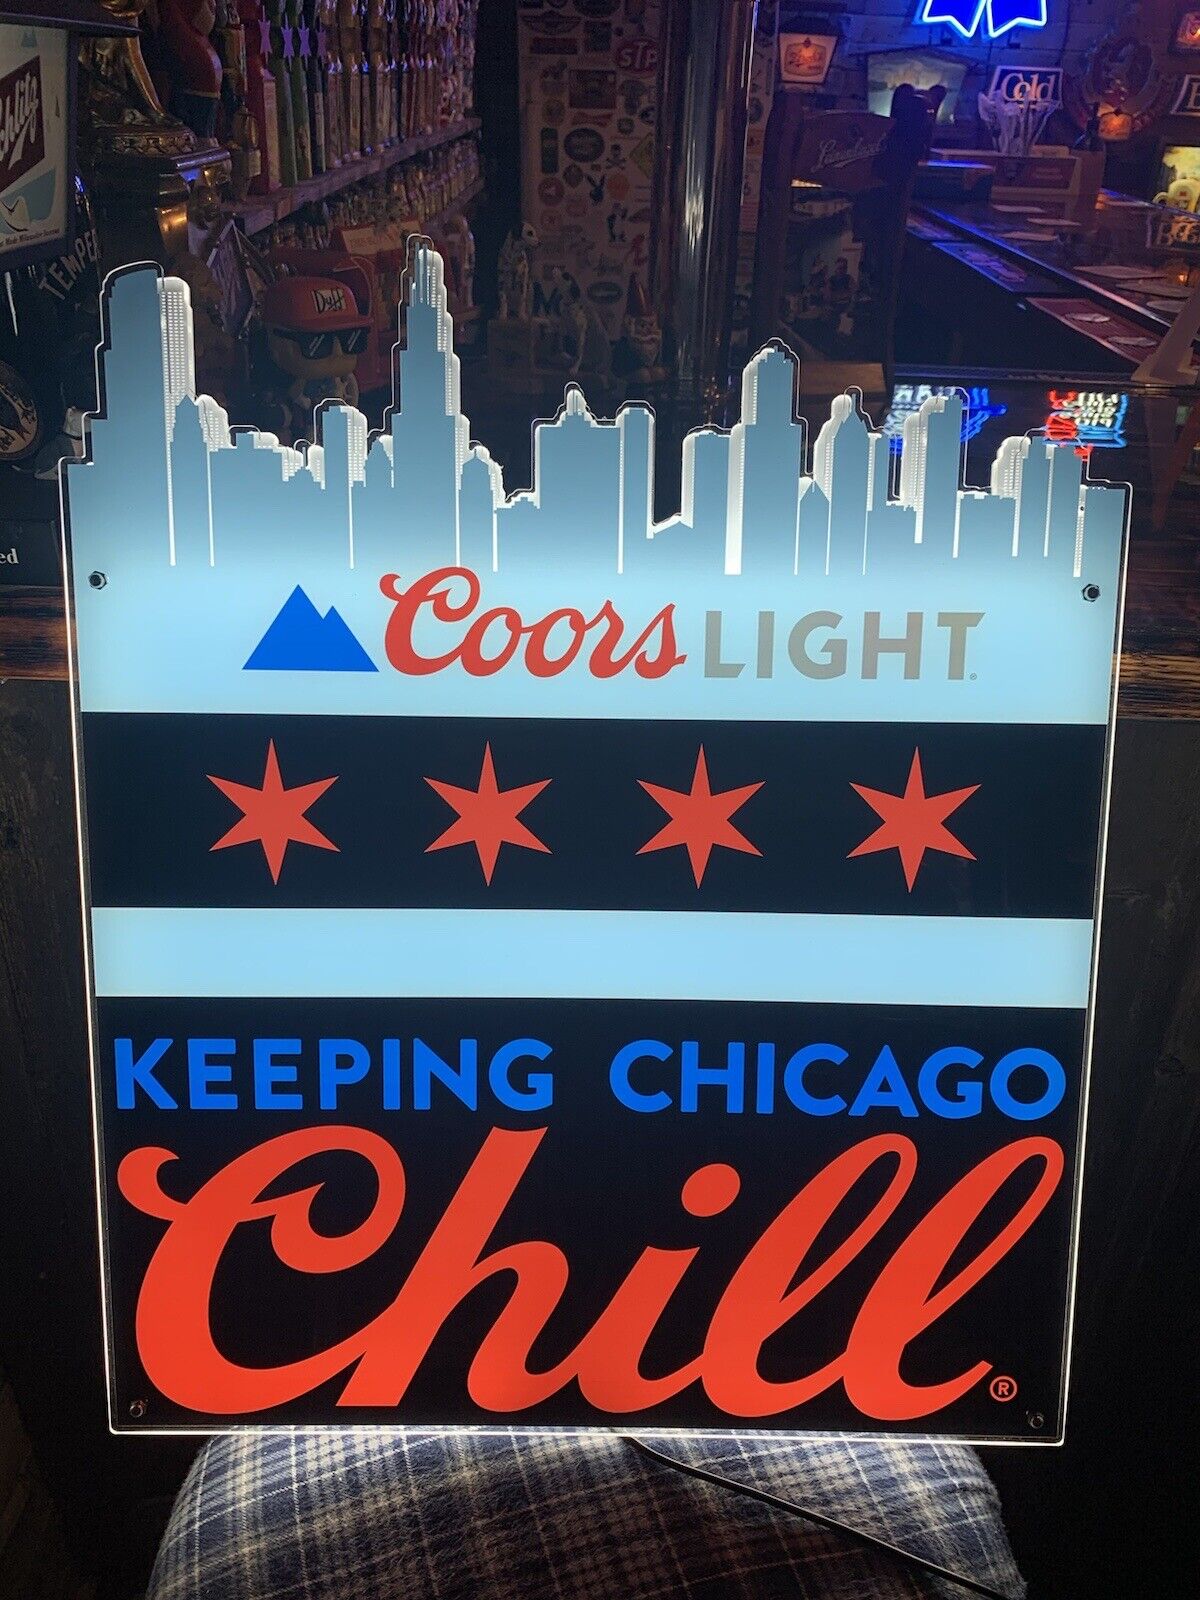 BRAND NEW IN THE BOX Rare Coors Light Beer Keep Chicago Chill LED Lighted Sign